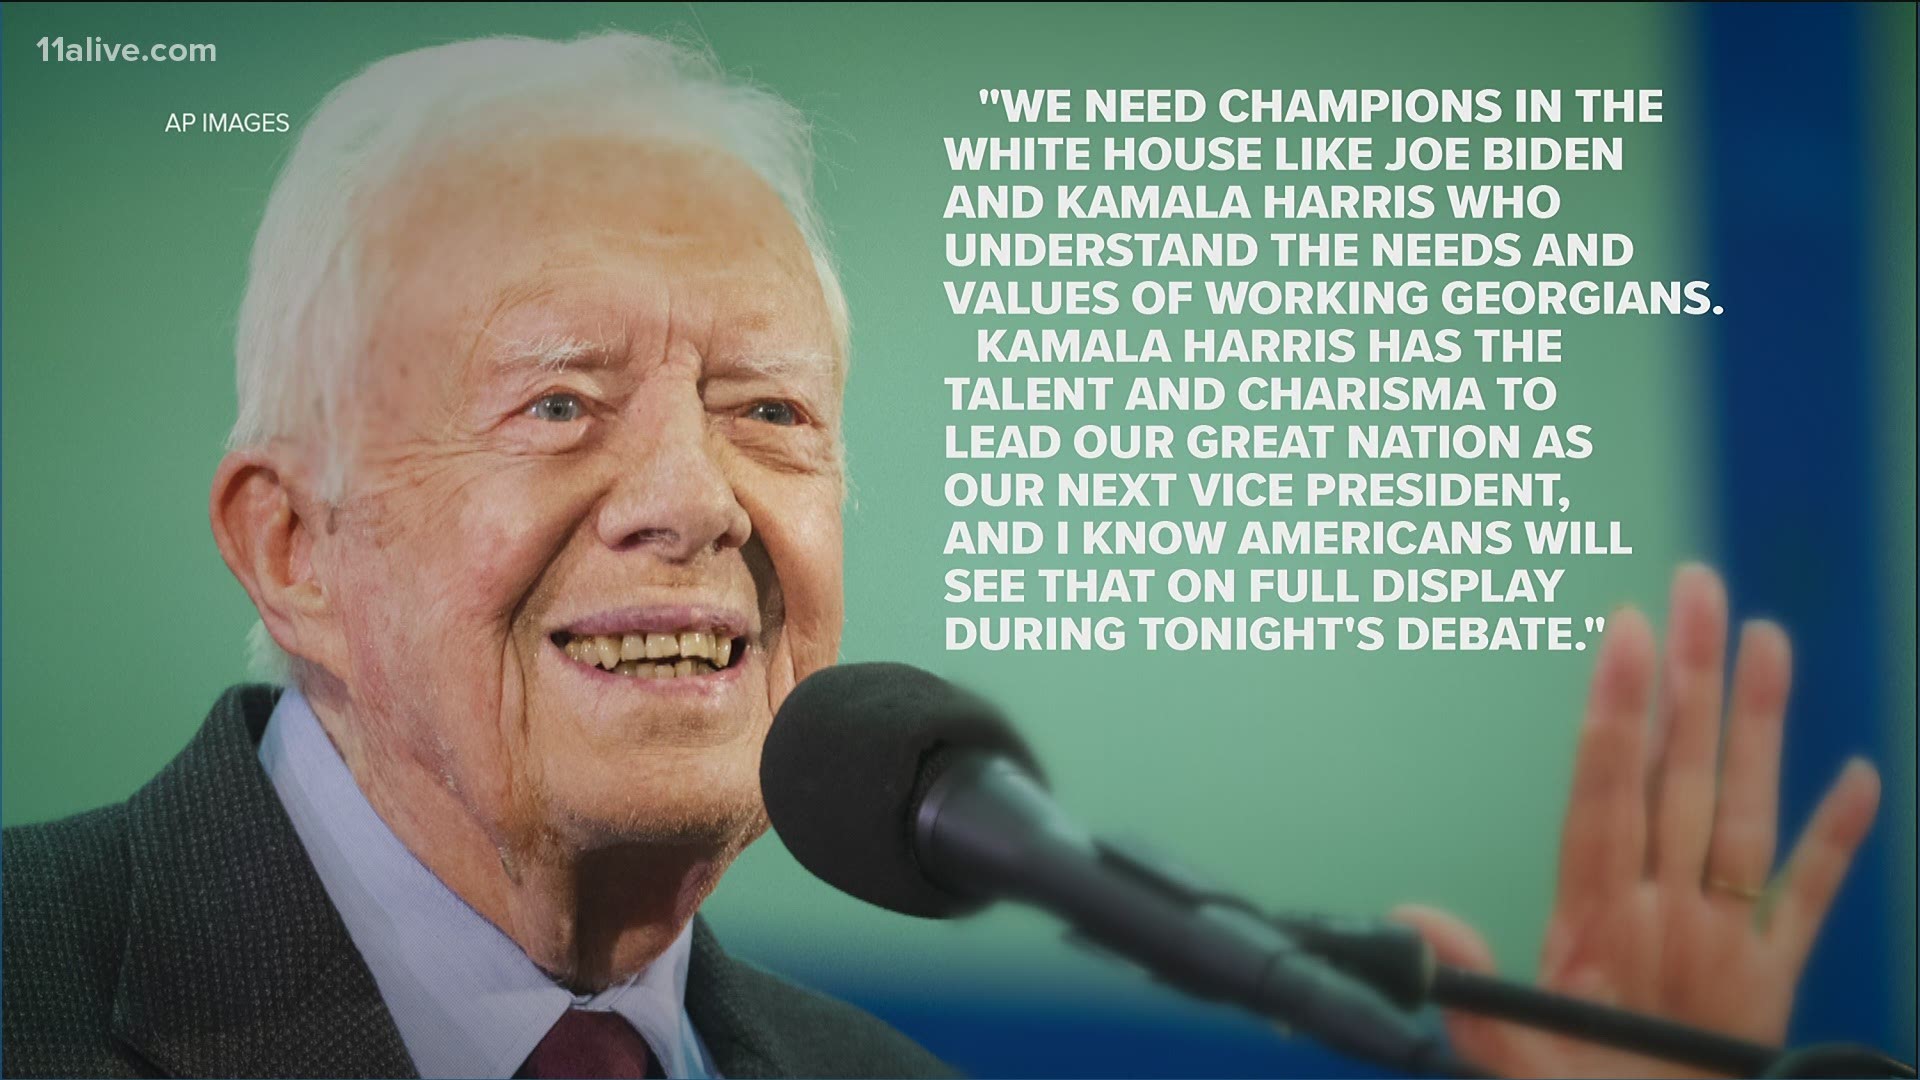 Here is what the former president had to say.